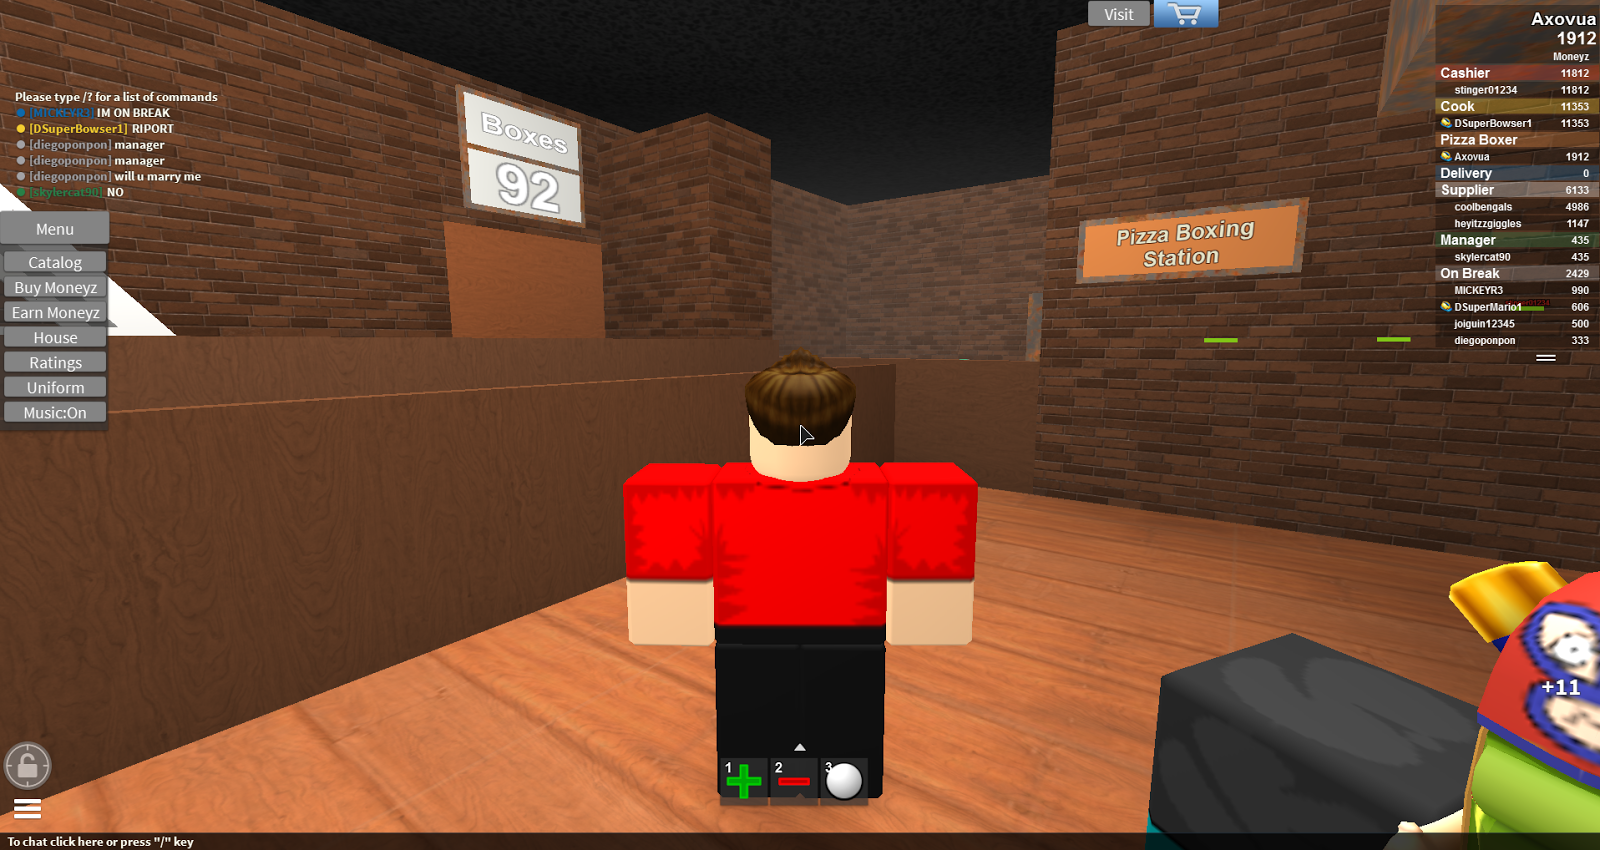 Axovua Game Reviews Work At A Pizza Place Roblox - roblox pictures 2015